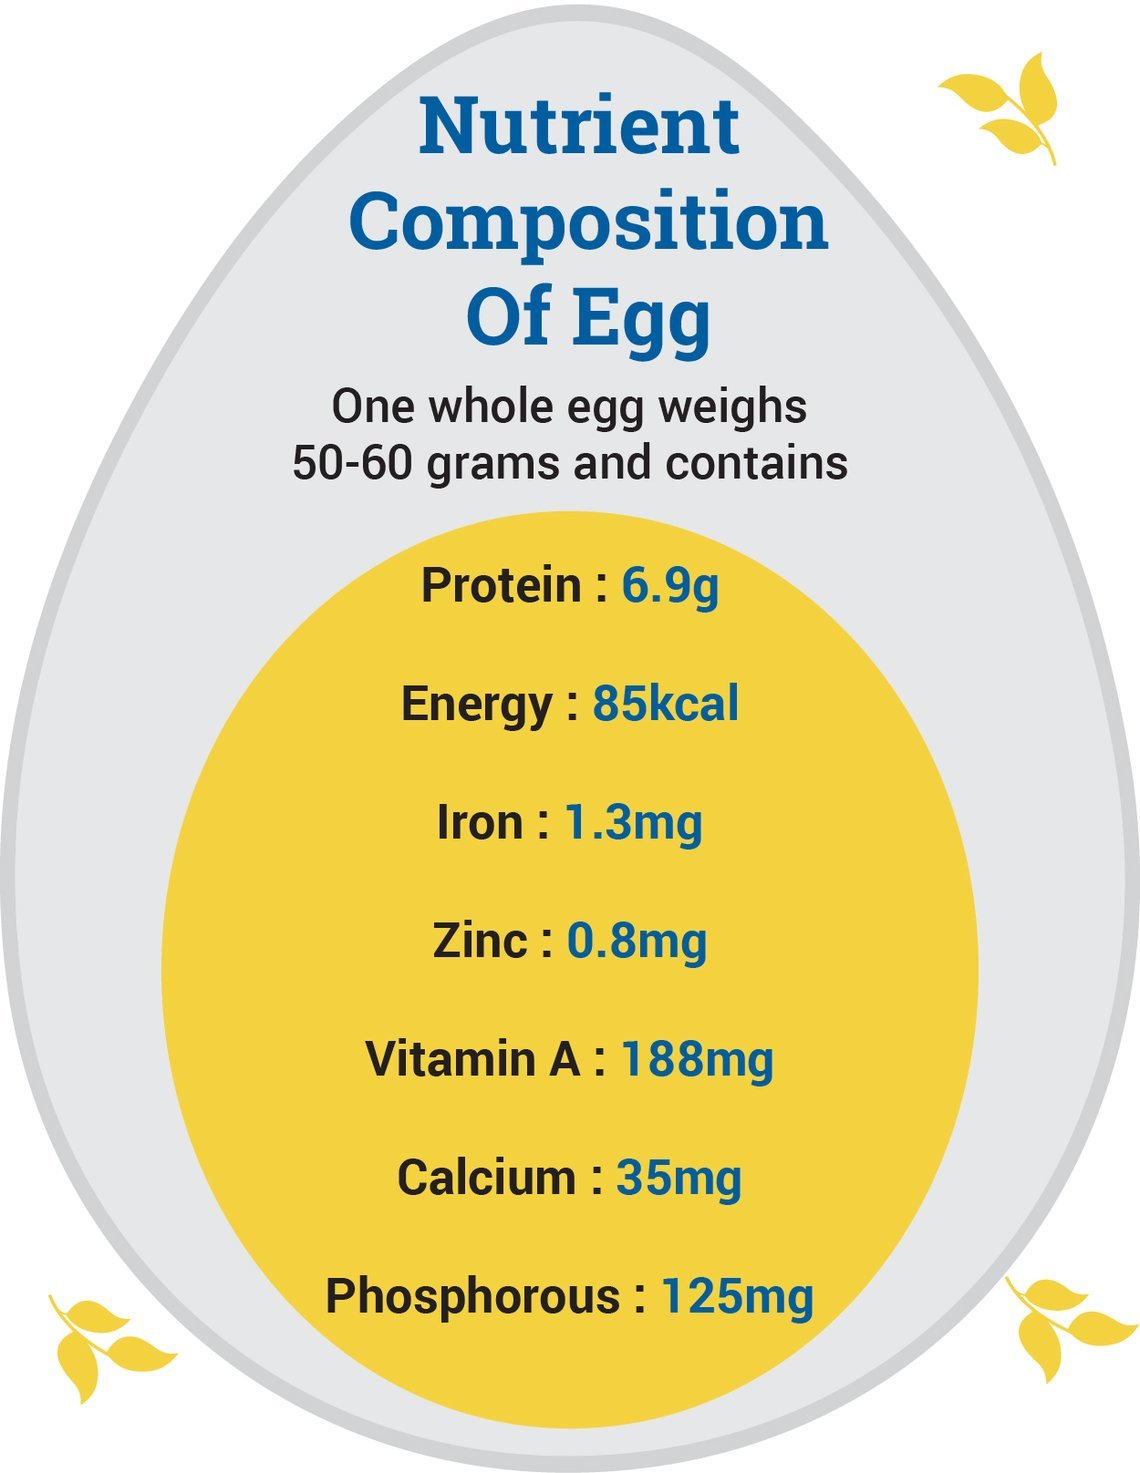 Why Eggs Are Important For Your Child's Nutritional Needs